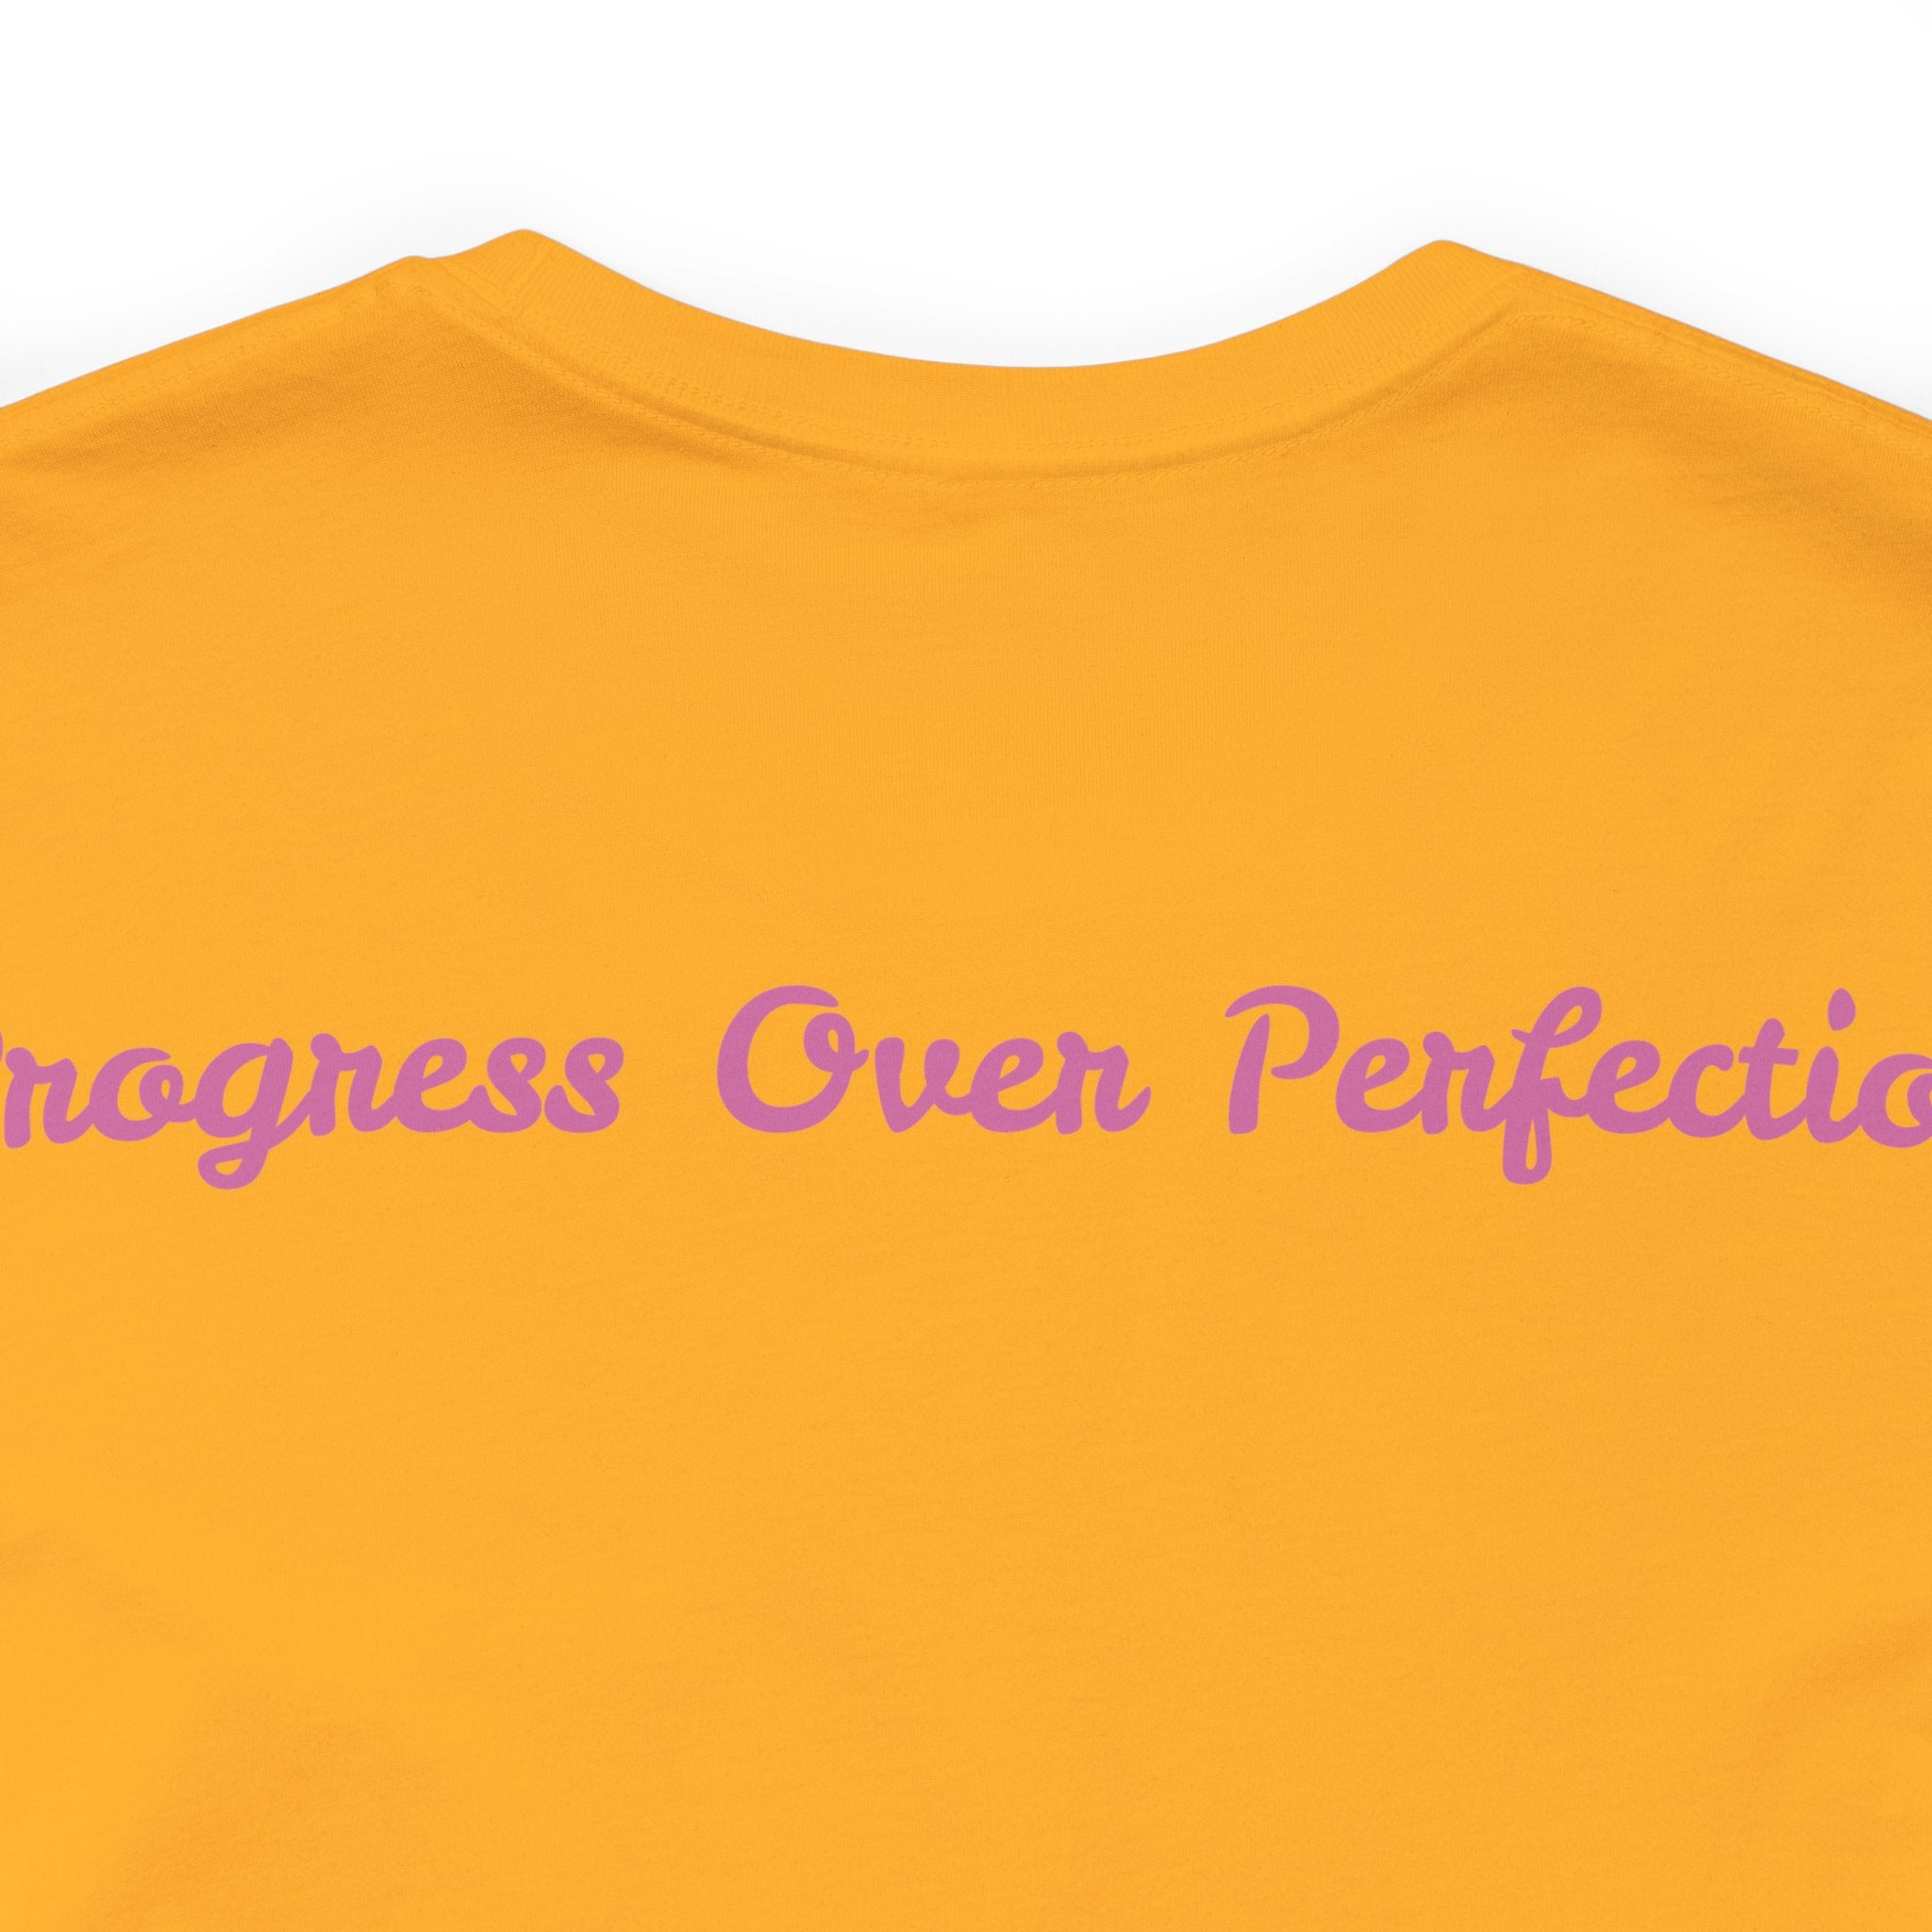 Progress Over Perfection Tee - Bella+Canvas 3001 Yellow Airlume Cotton Bella+Canvas 3001 Crew Neckline Jersey Short Sleeve Lightweight Fabric Mental Health Support Retail Fit Tear-away Label Tee Unisex Tee T-Shirt 15519020579080726281_2048 Printify